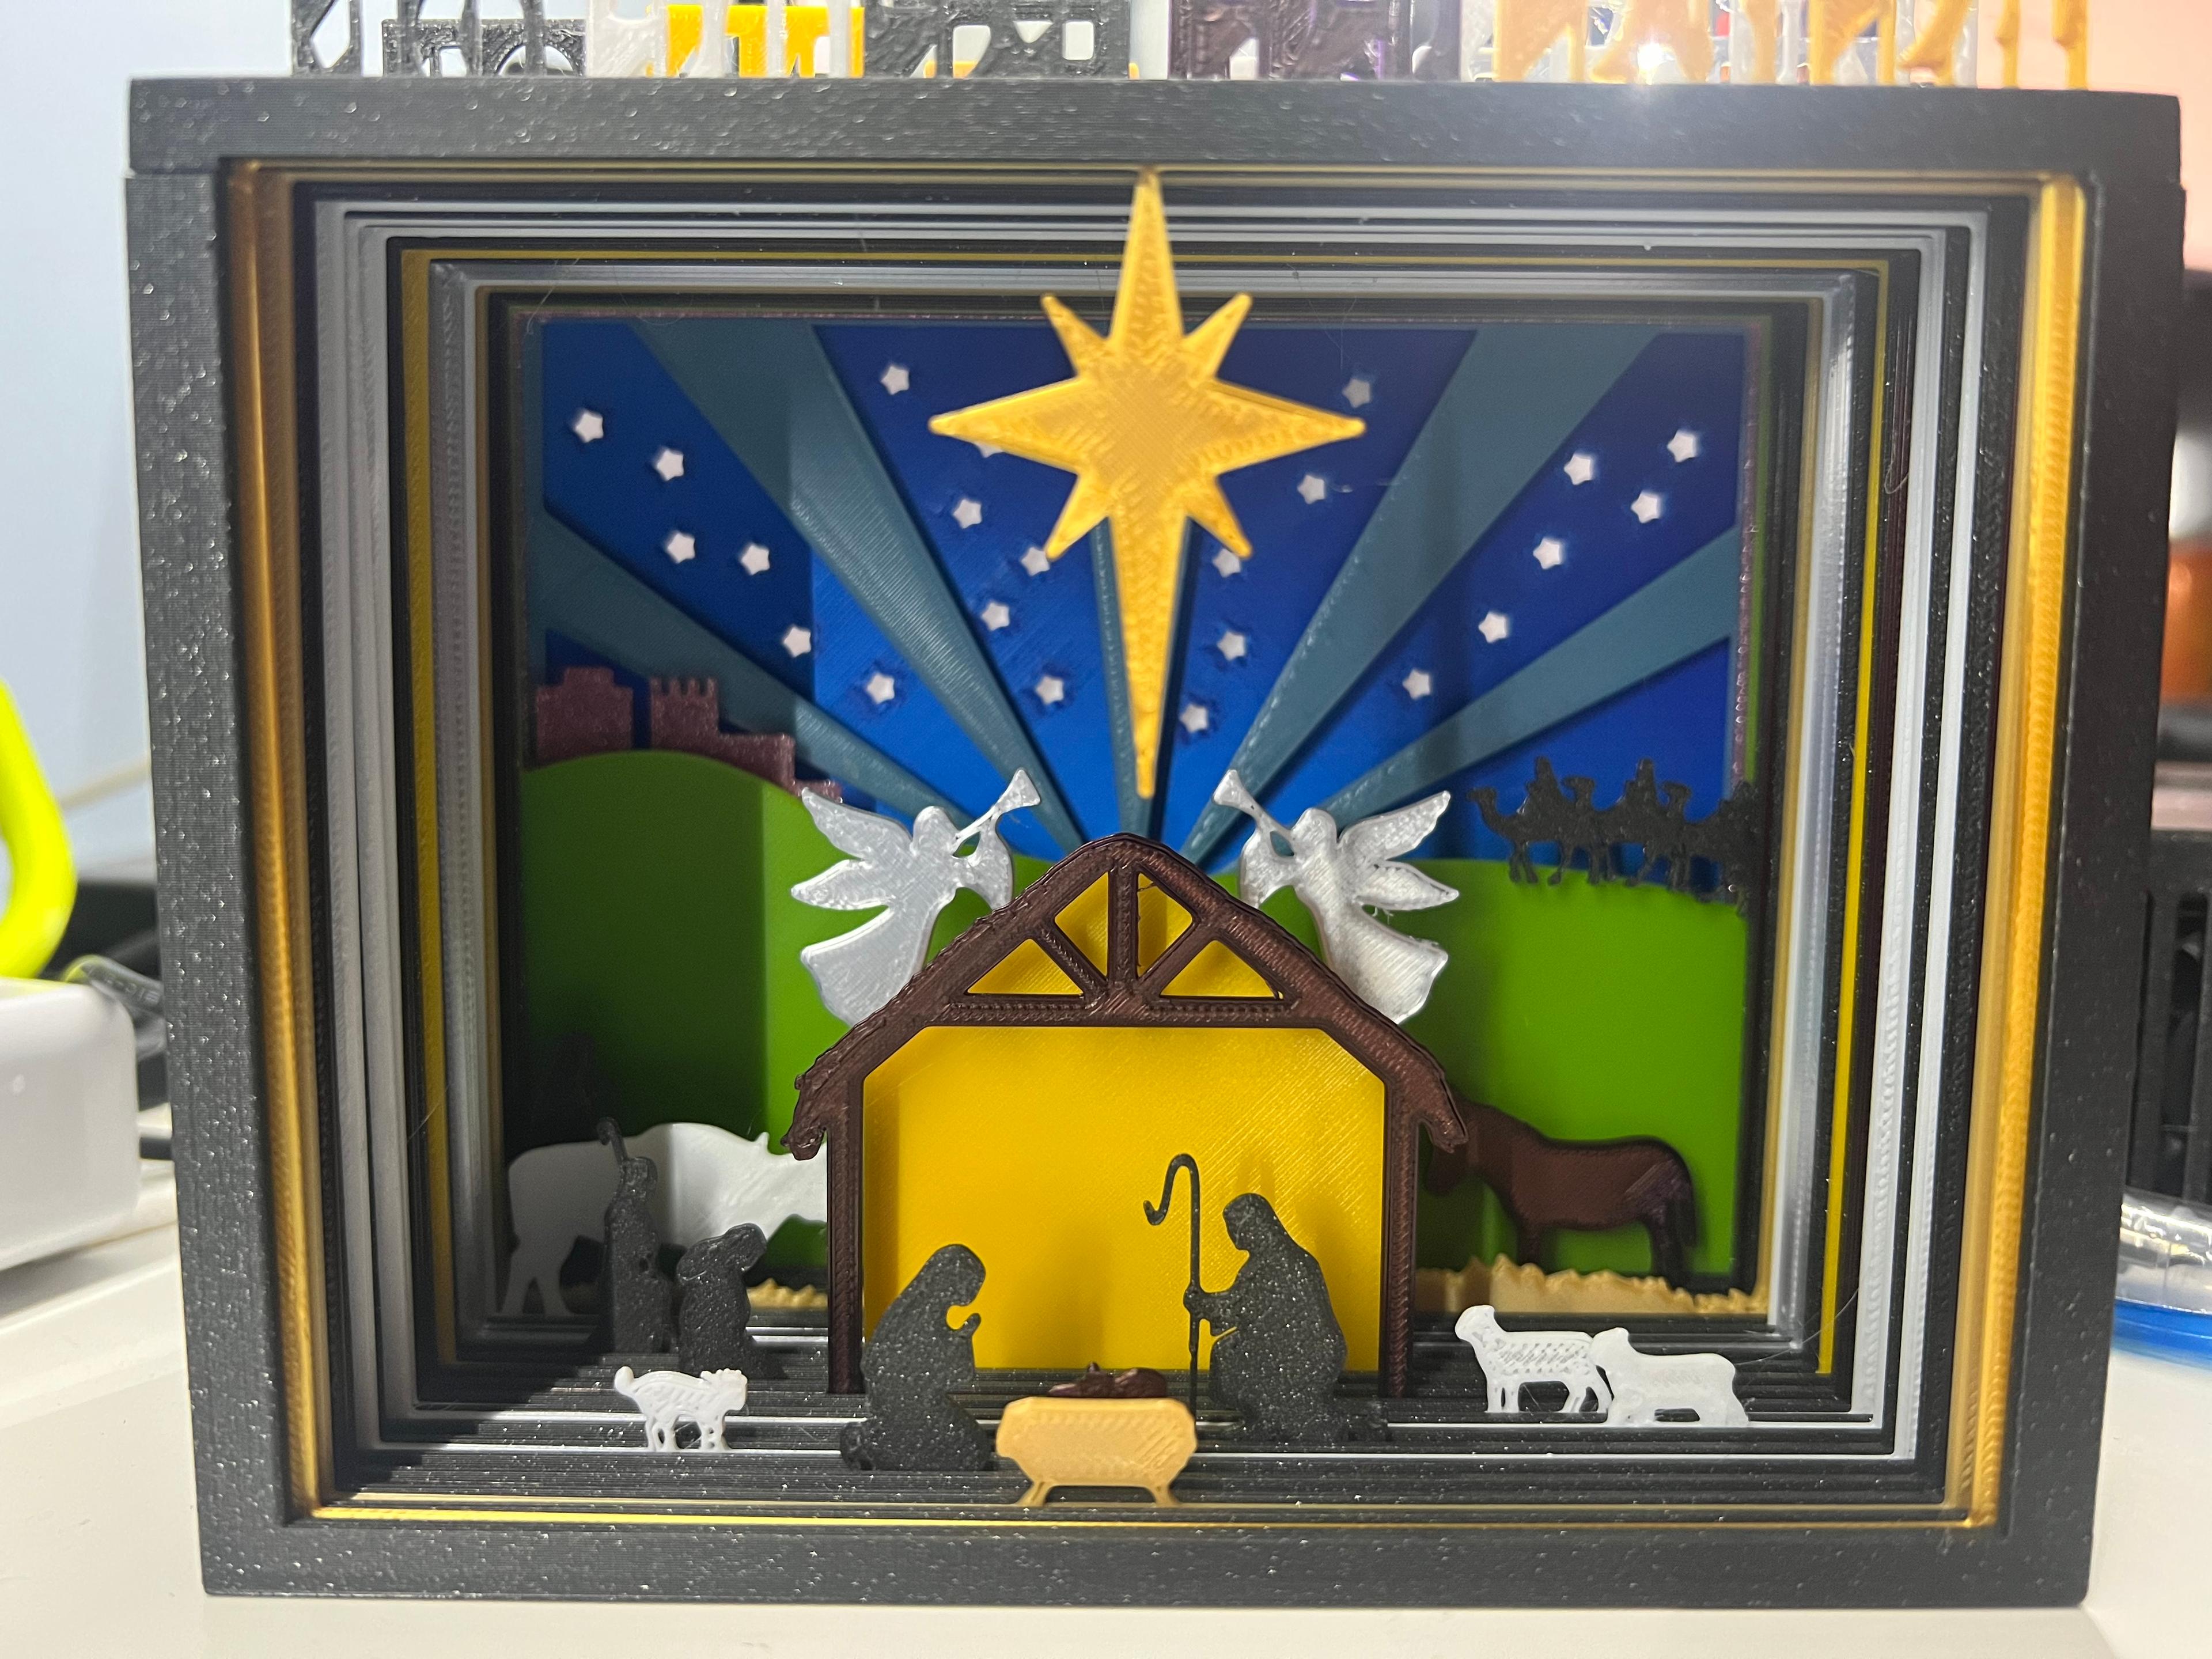 Silhouette Advent Calendar - Lovely project! Thank you for sharing! - 3d model